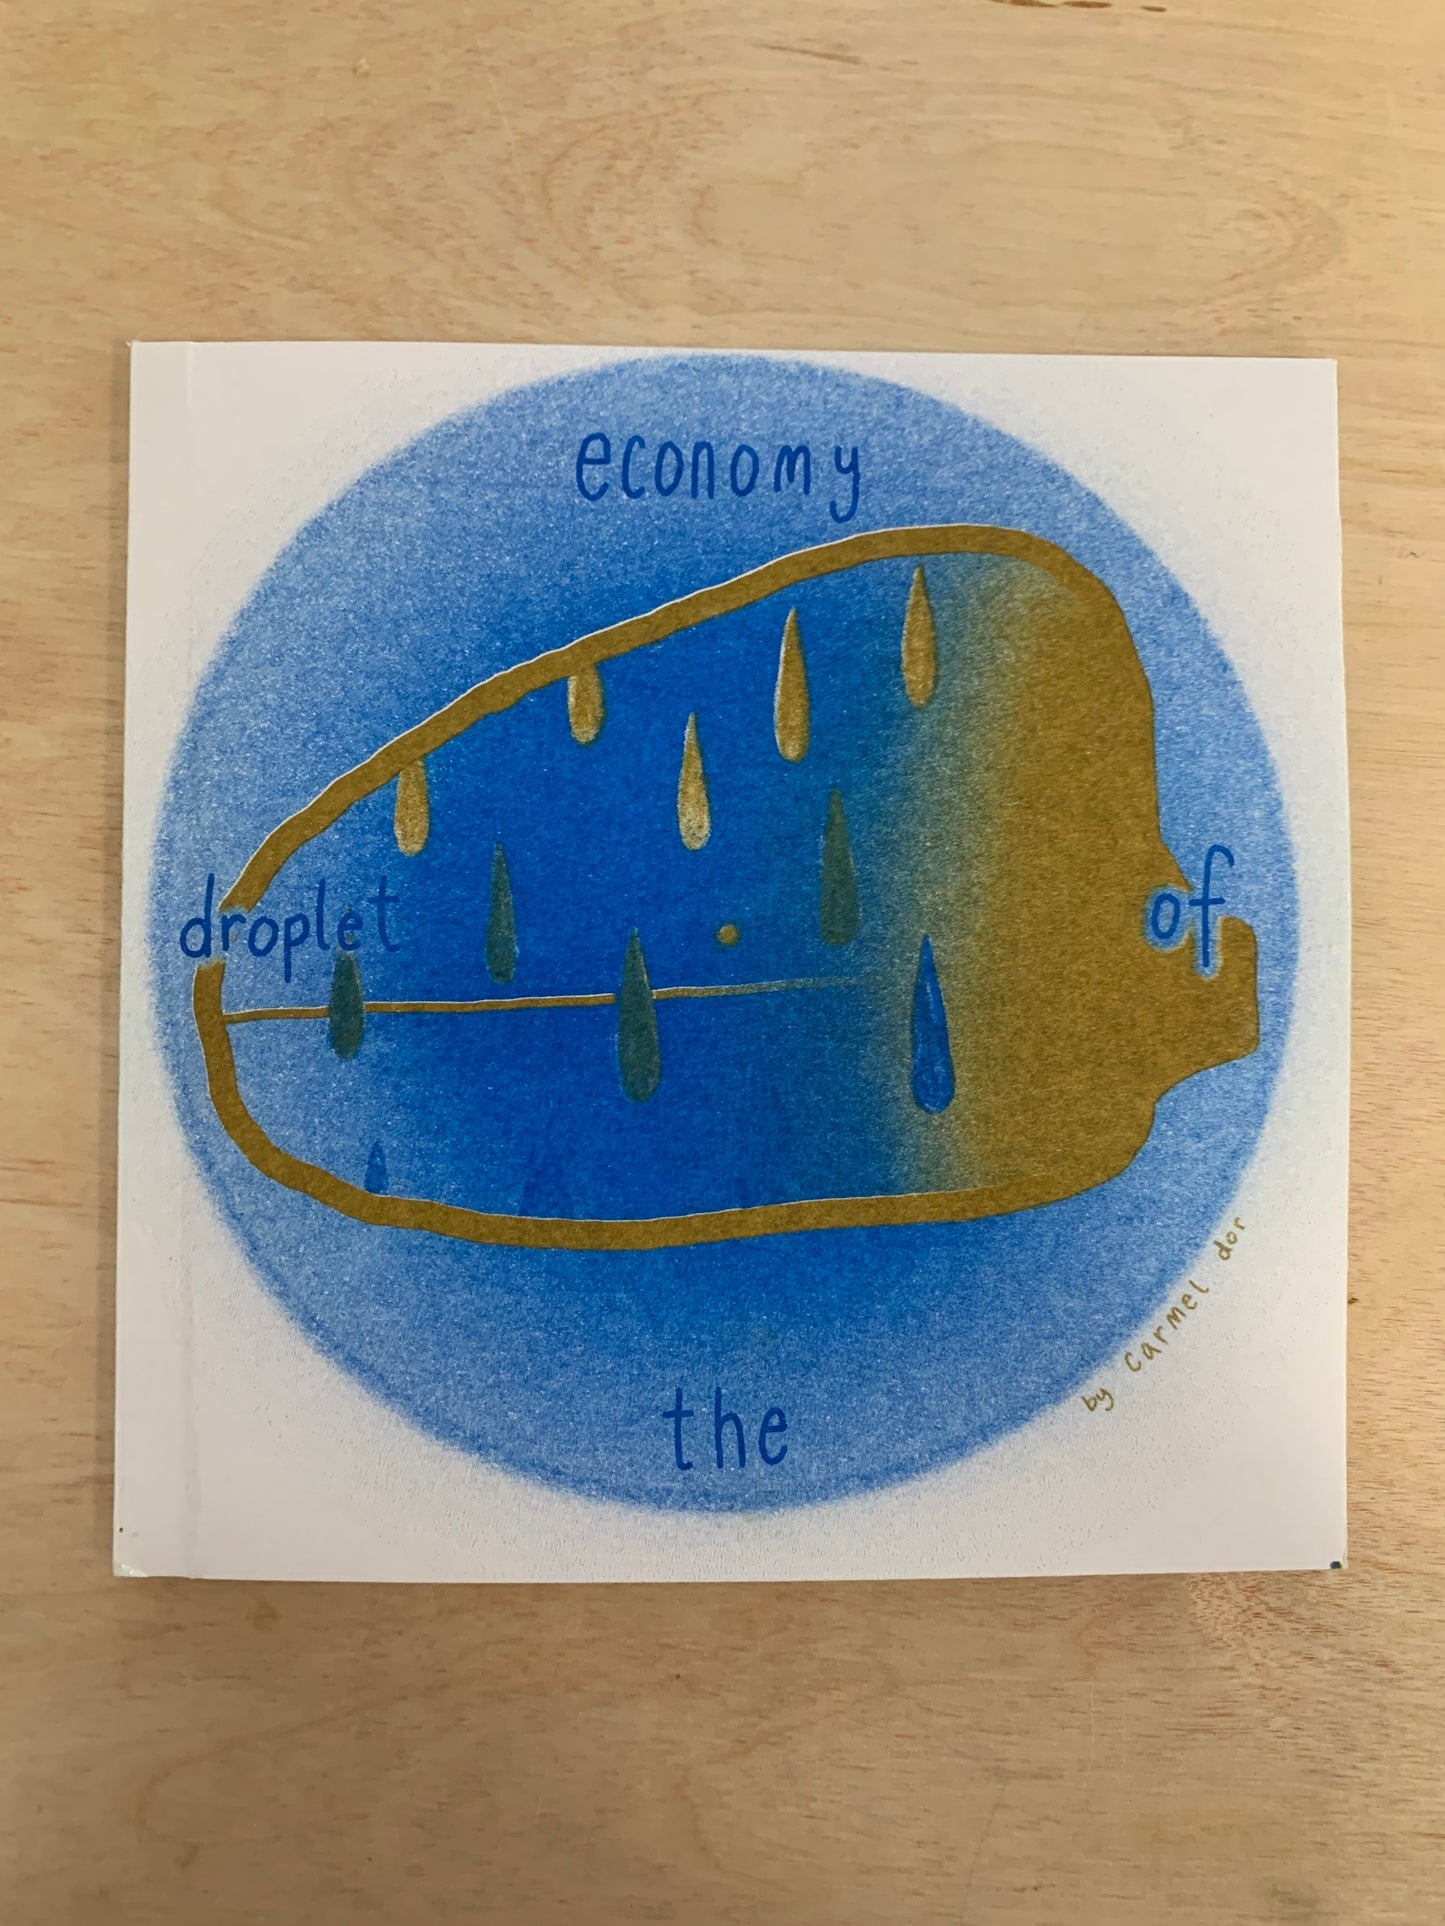 Economy of the Droplet